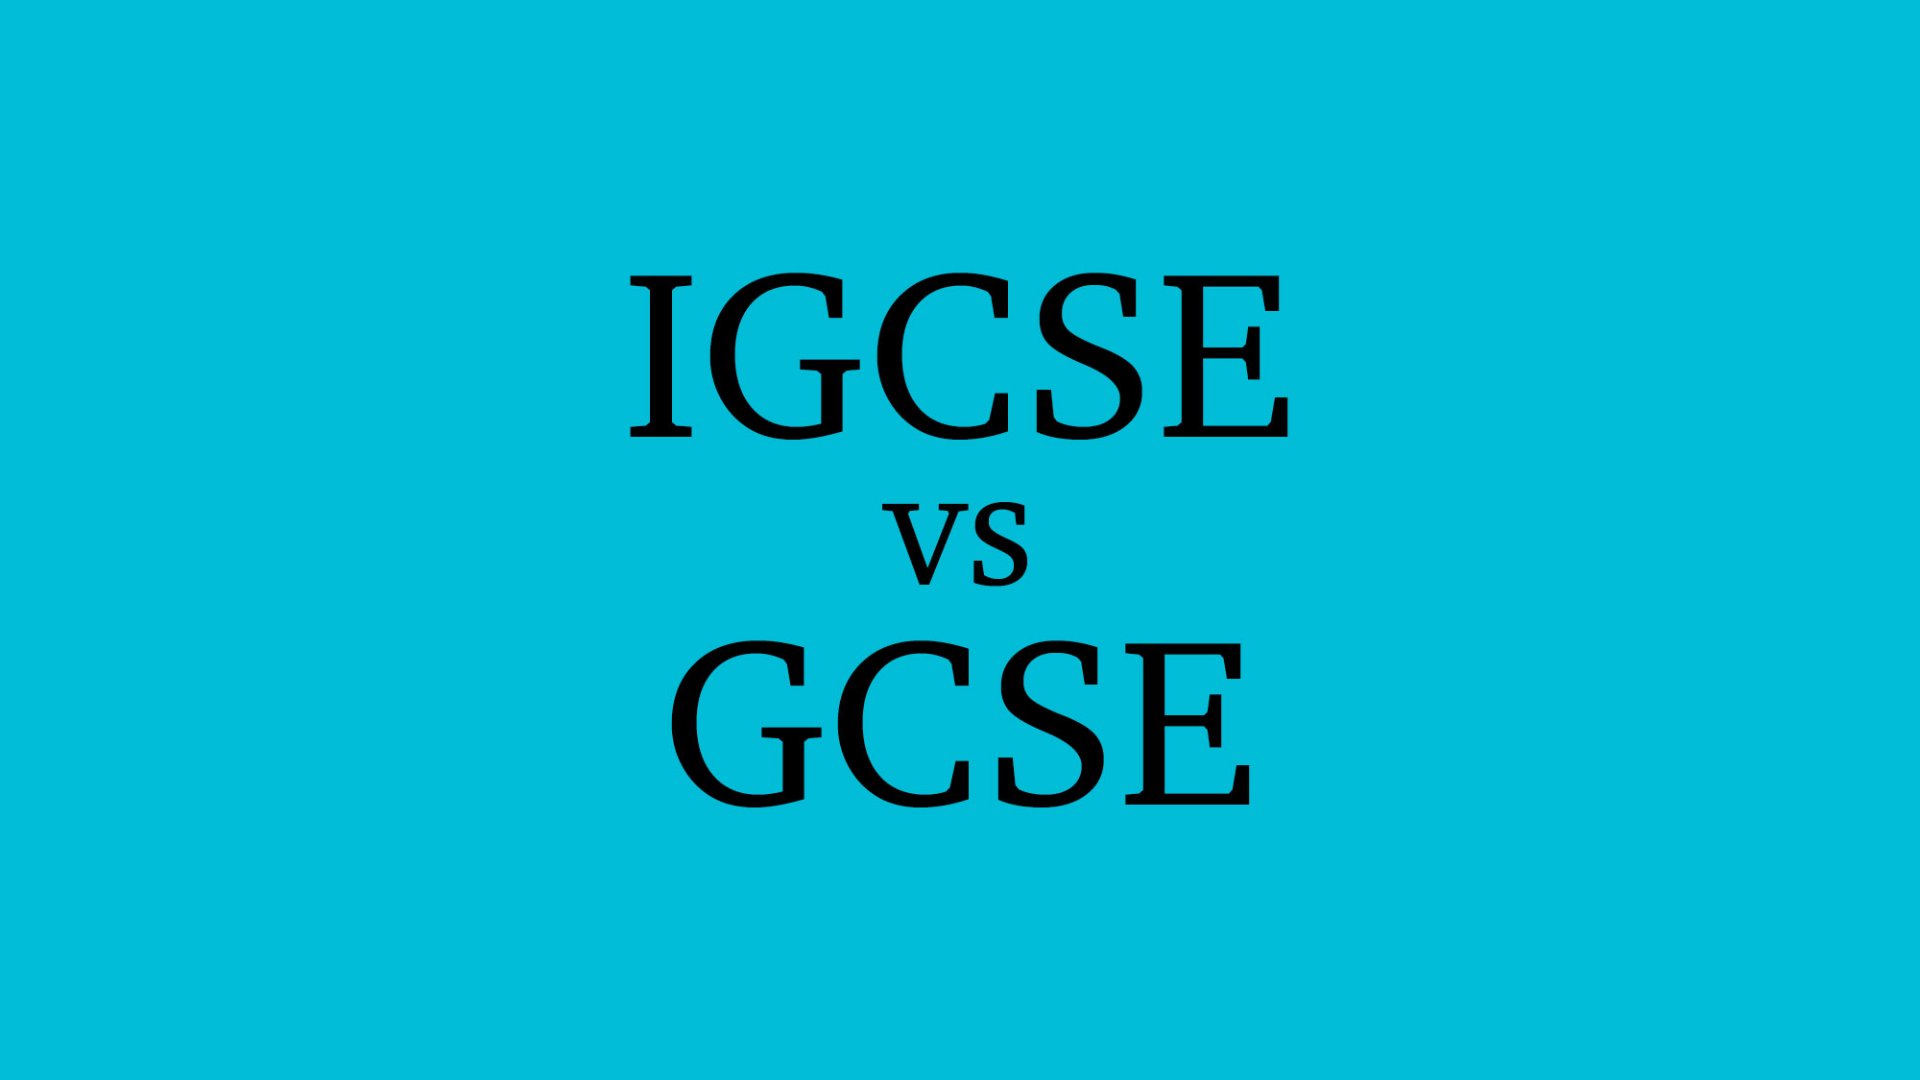 IGCSE vs GCSE: What's the Difference? (updated)